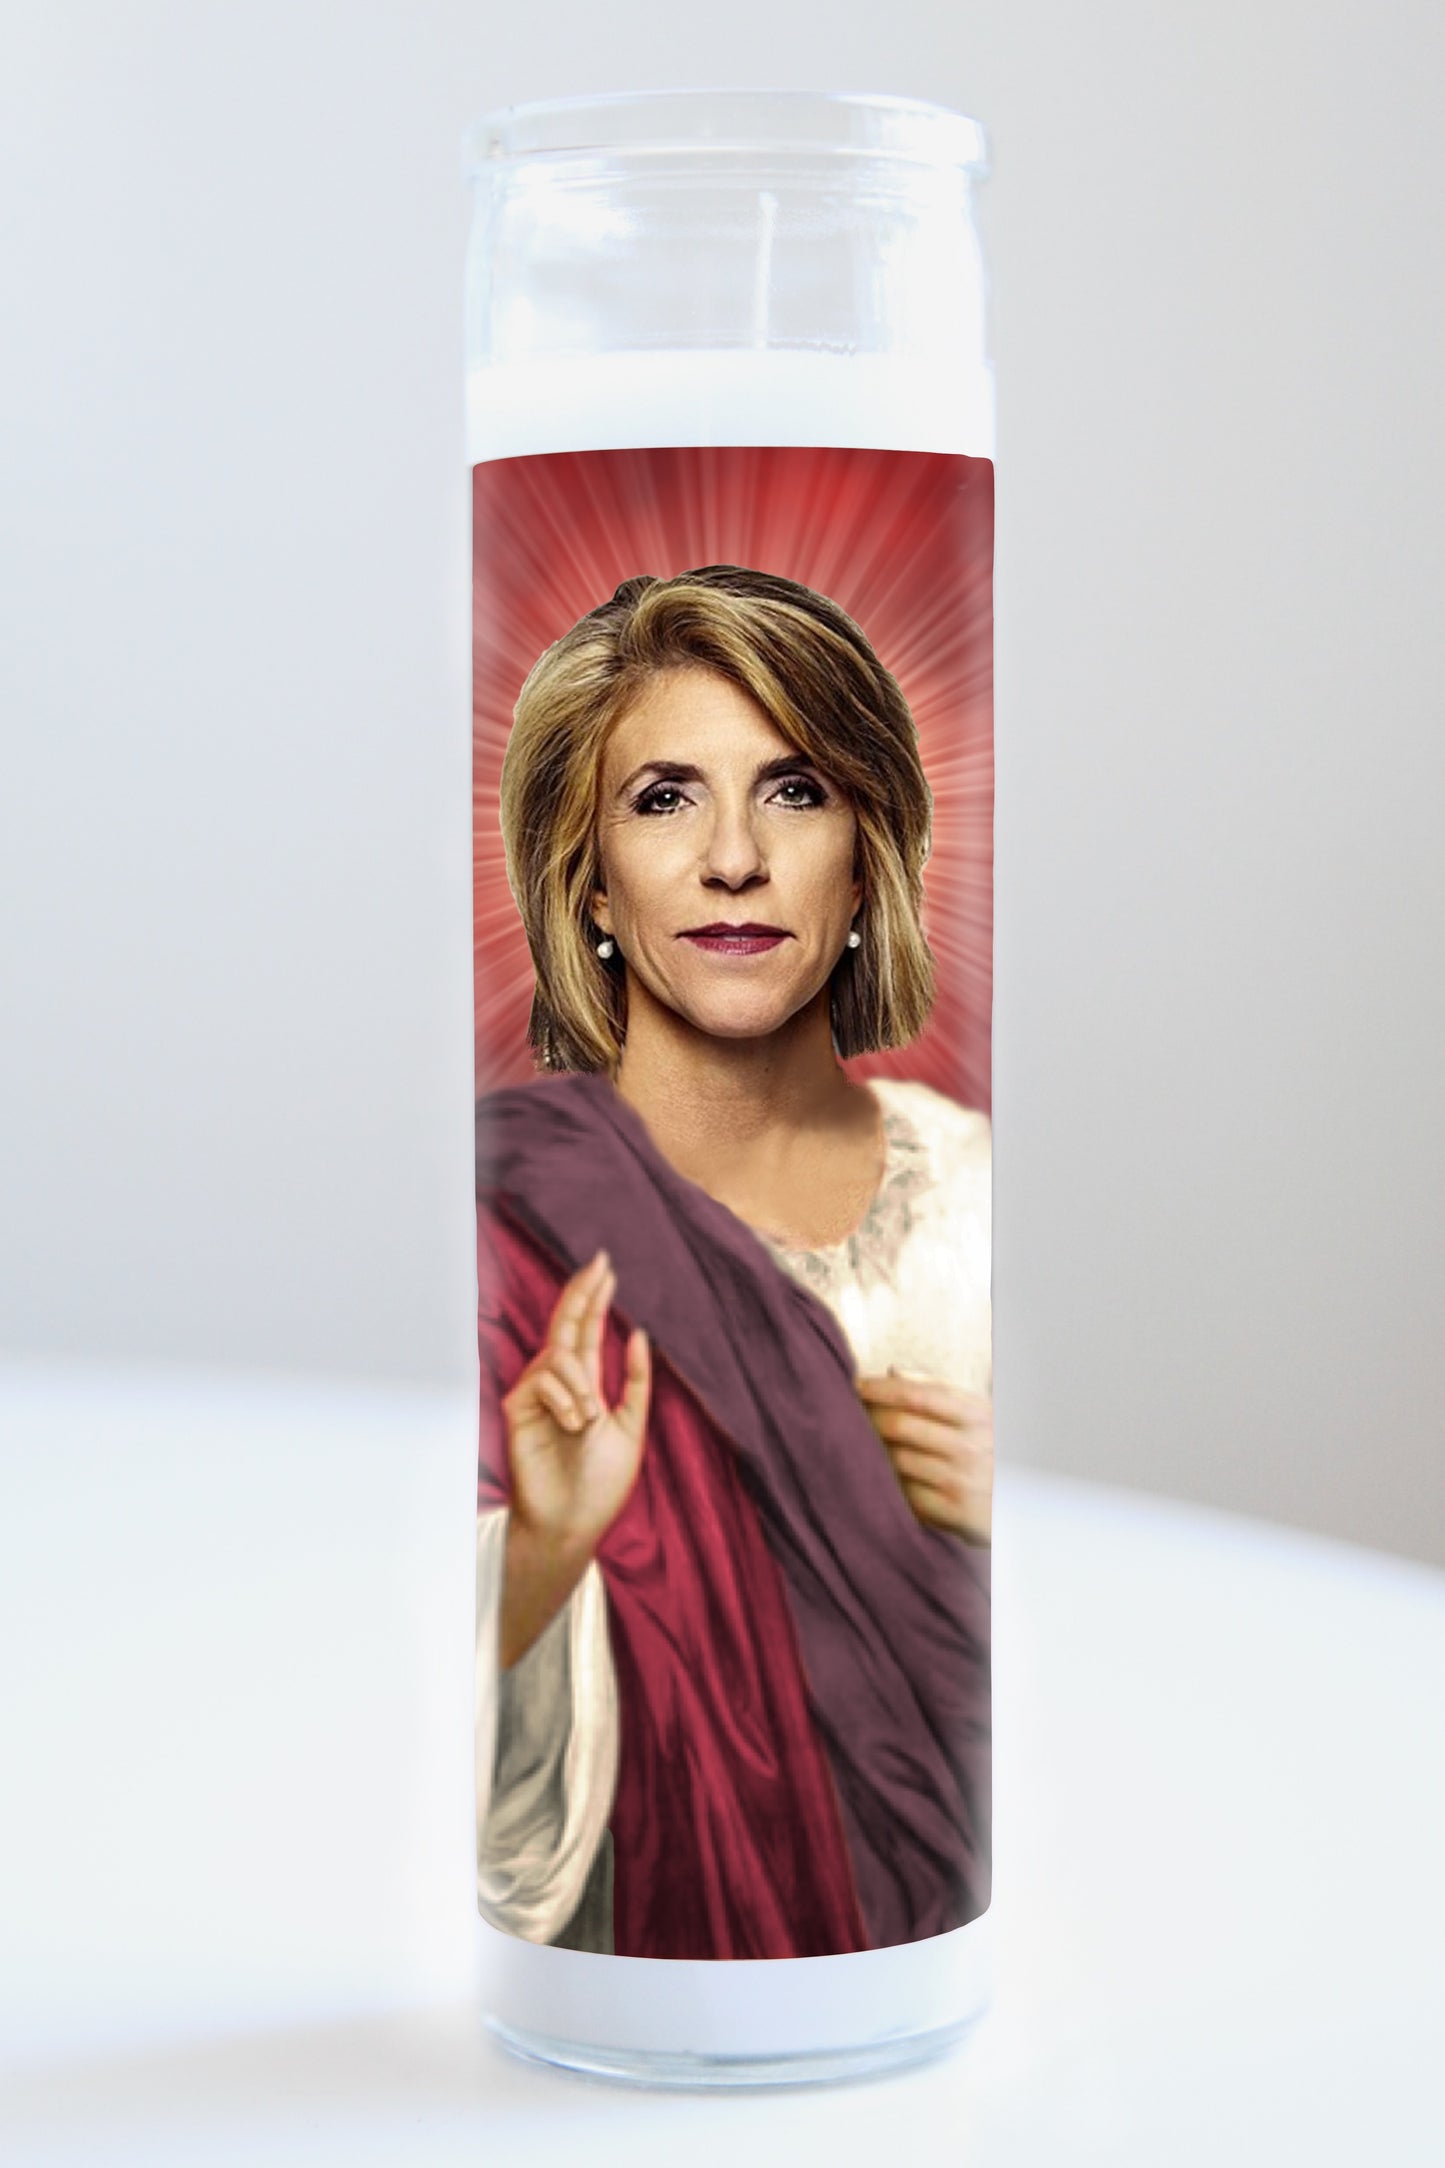 Kelly Siegler (Cold Justice)